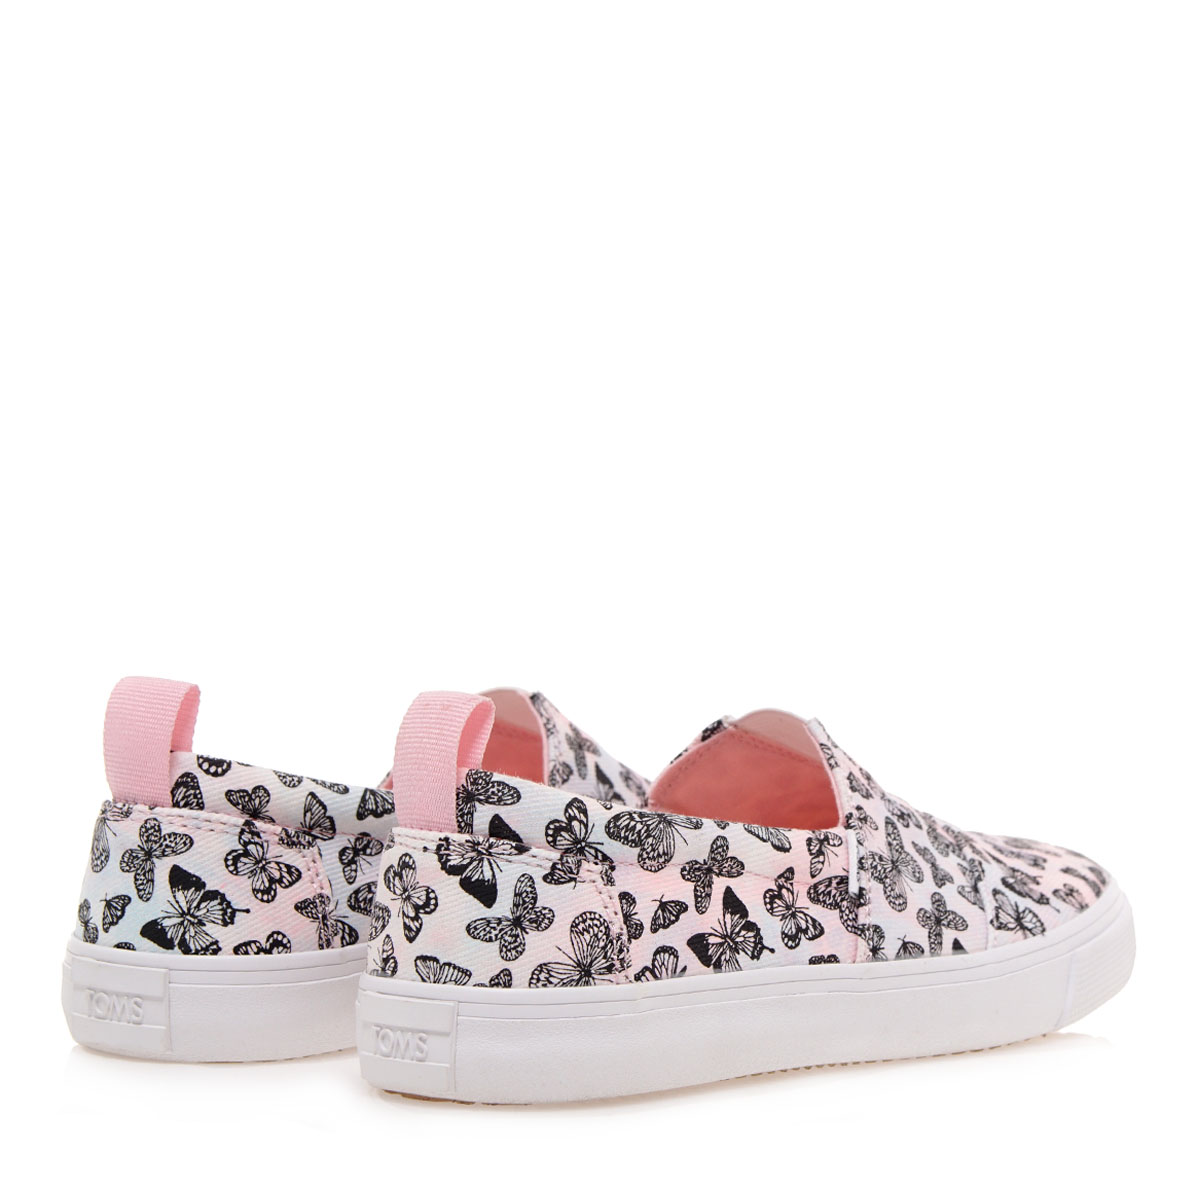 TOMS Girl's shoes - 3